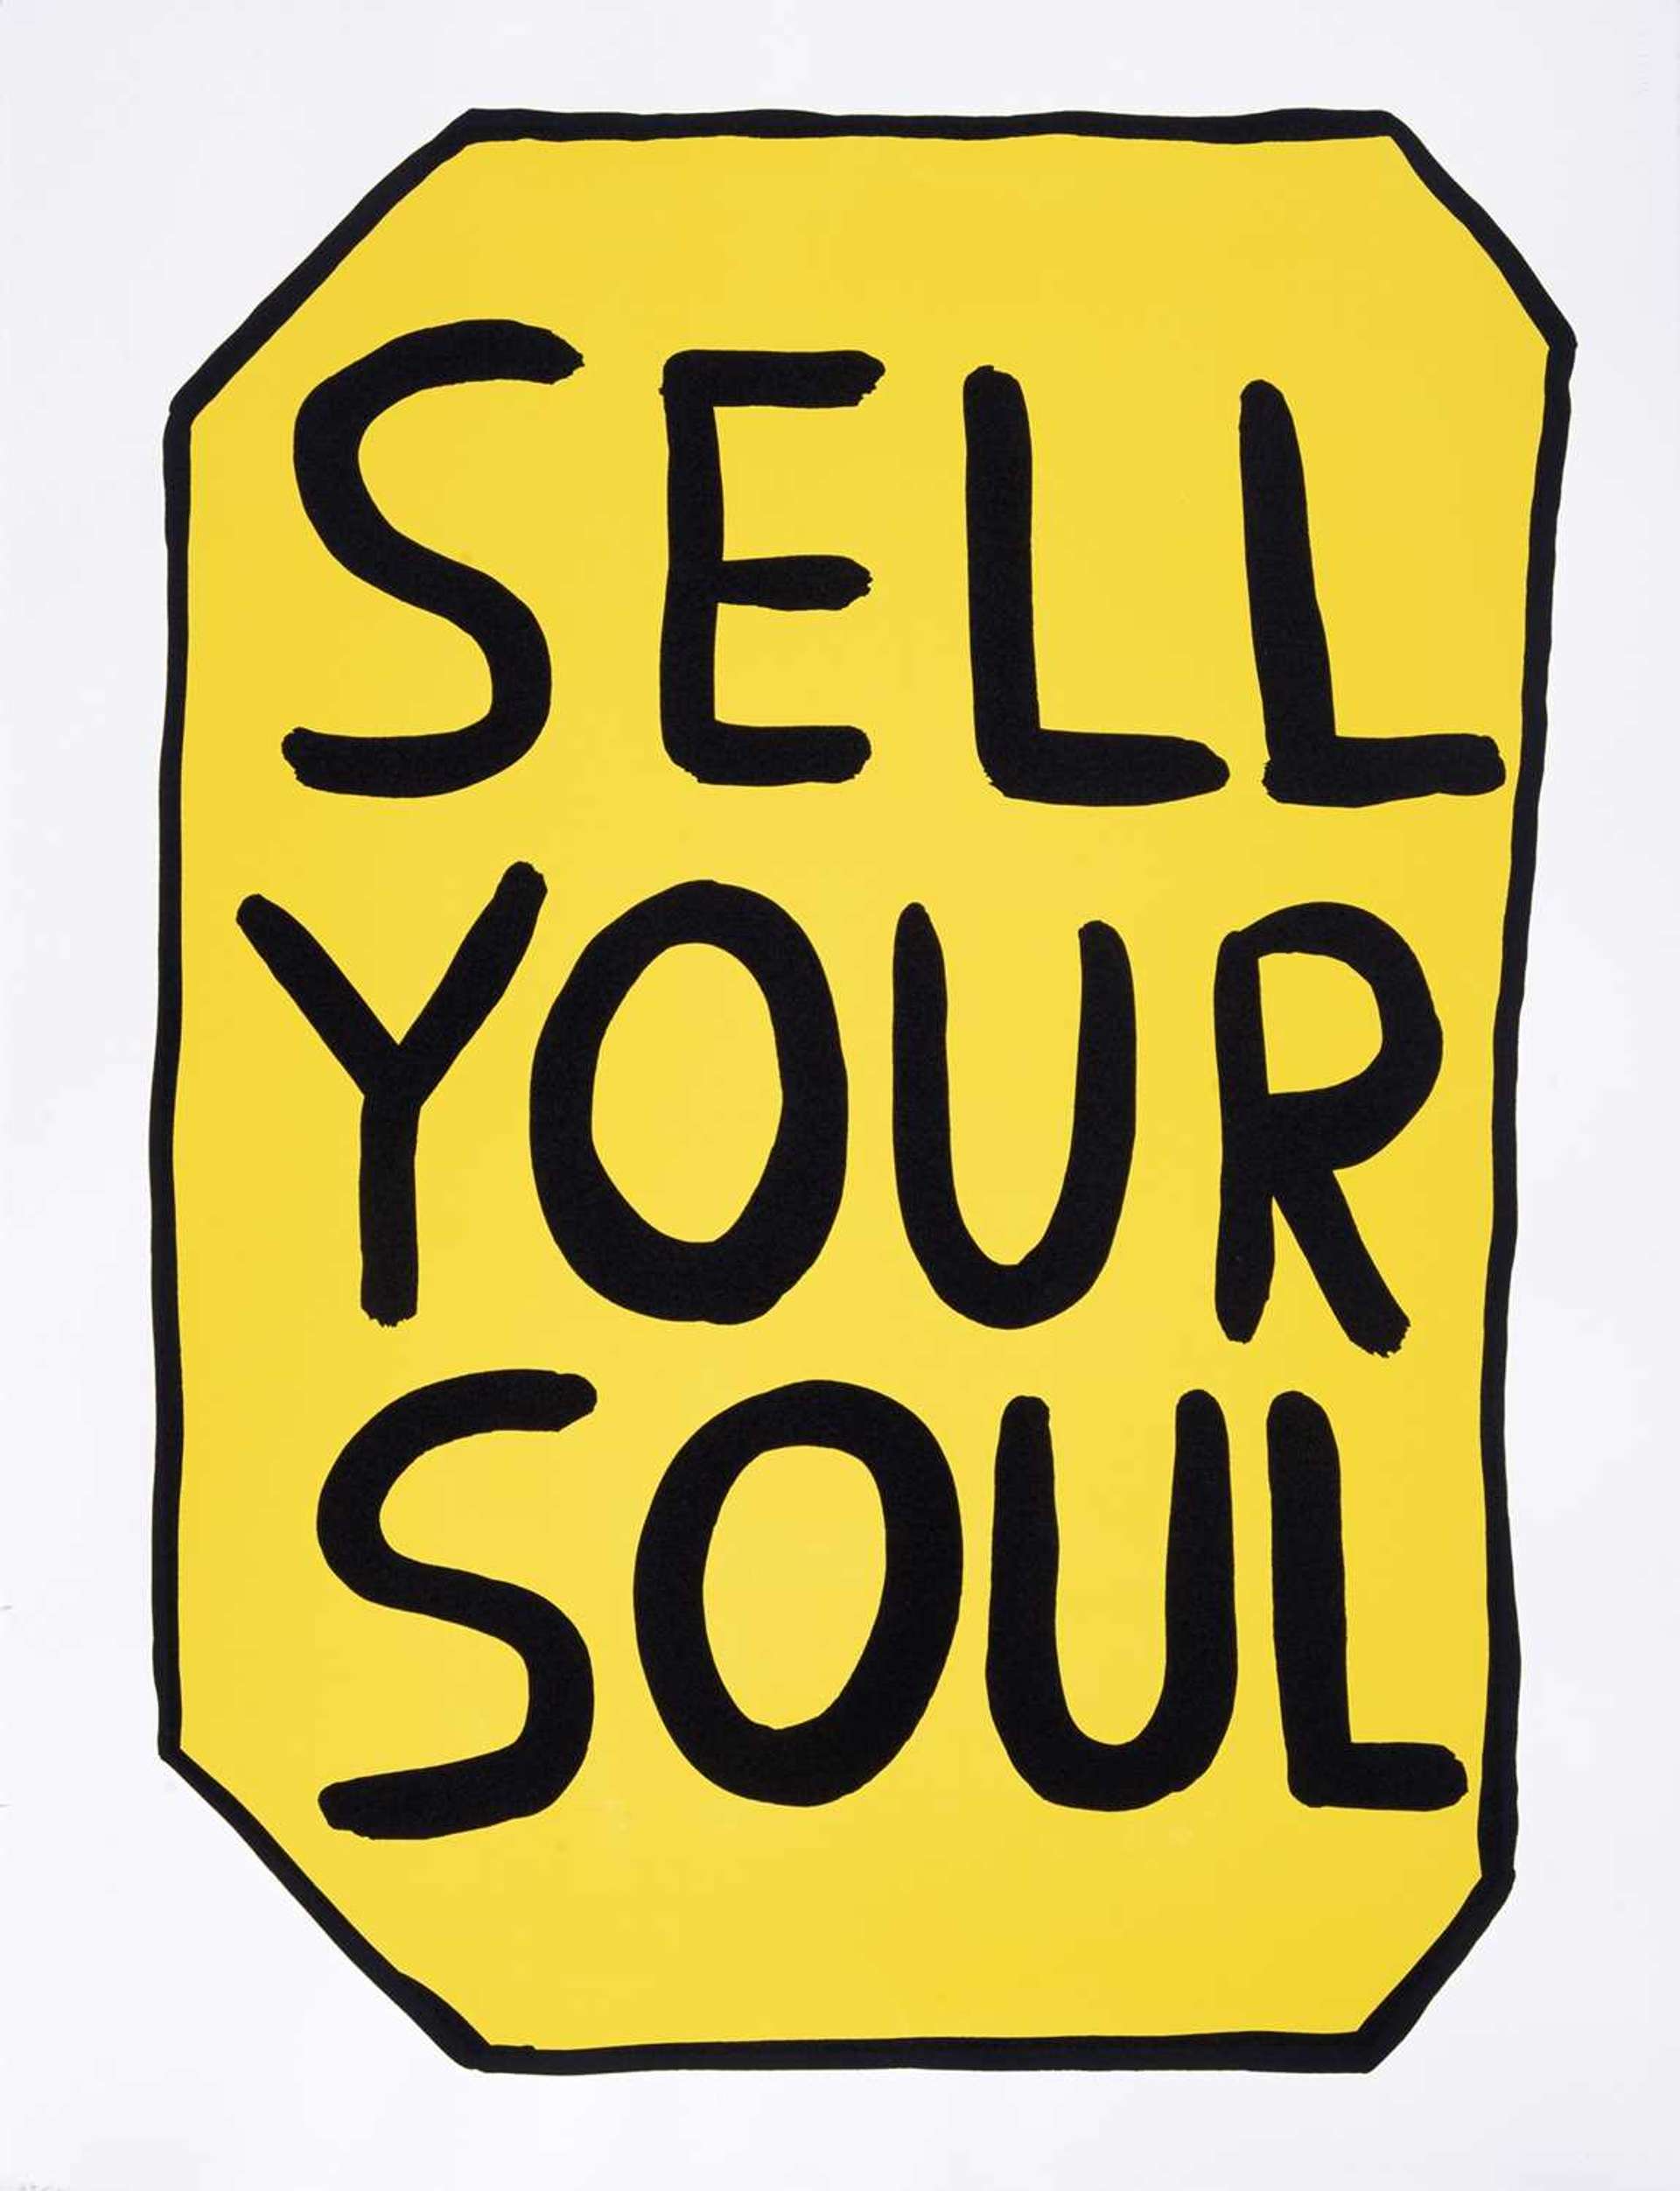 This print shows a large yellow sign, saying "Sell Your Soul", by David Shrigley.